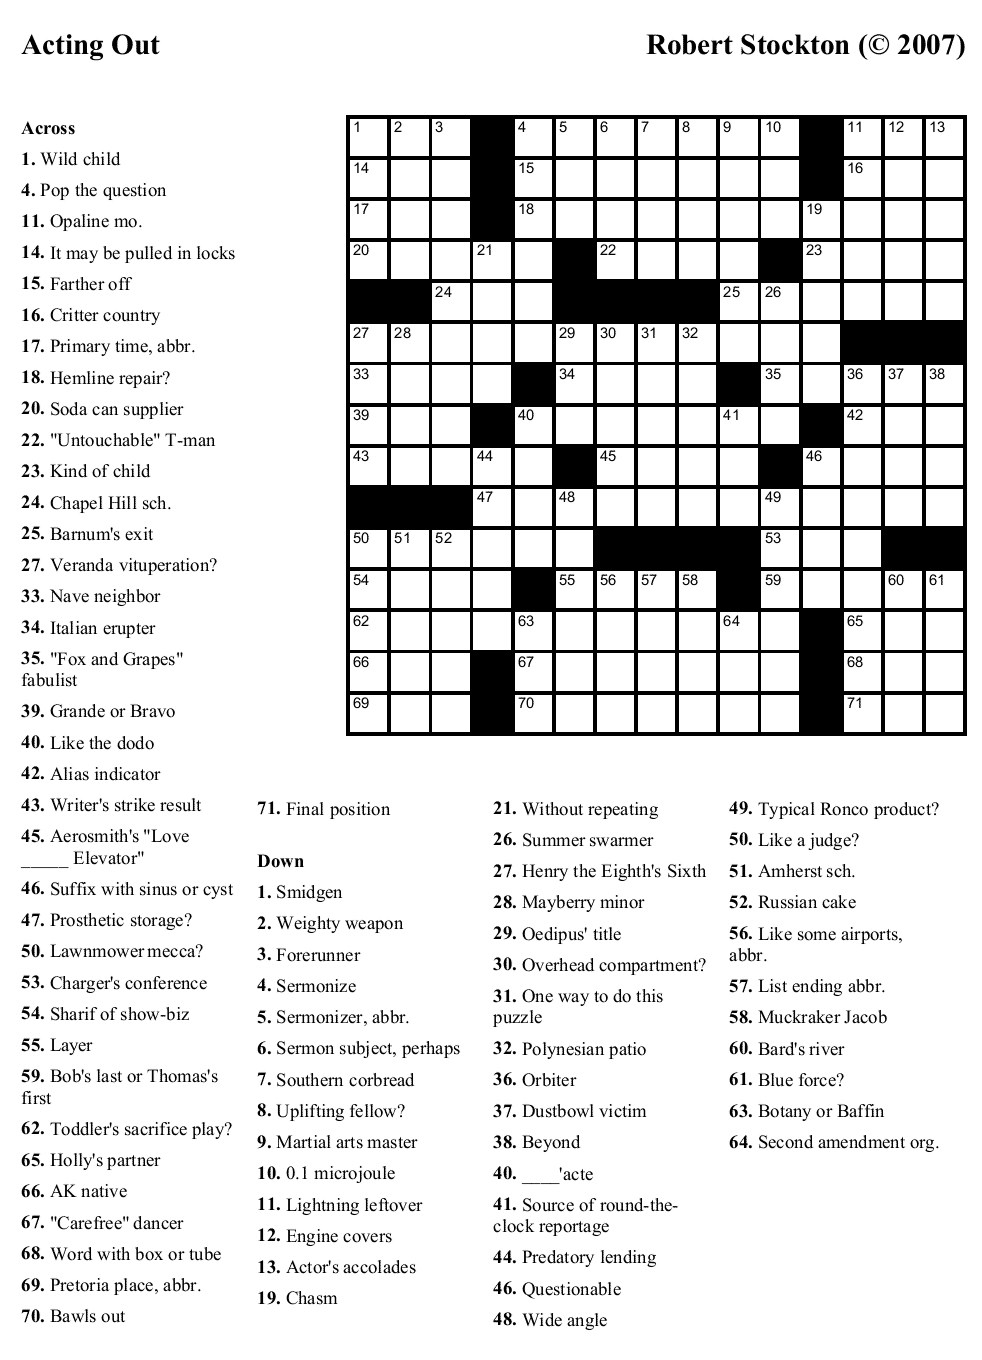 Simple Crossword Puzzles Printable (84+ Images In Collection) Page 1 - Printable Nfl Crossword Puzzles